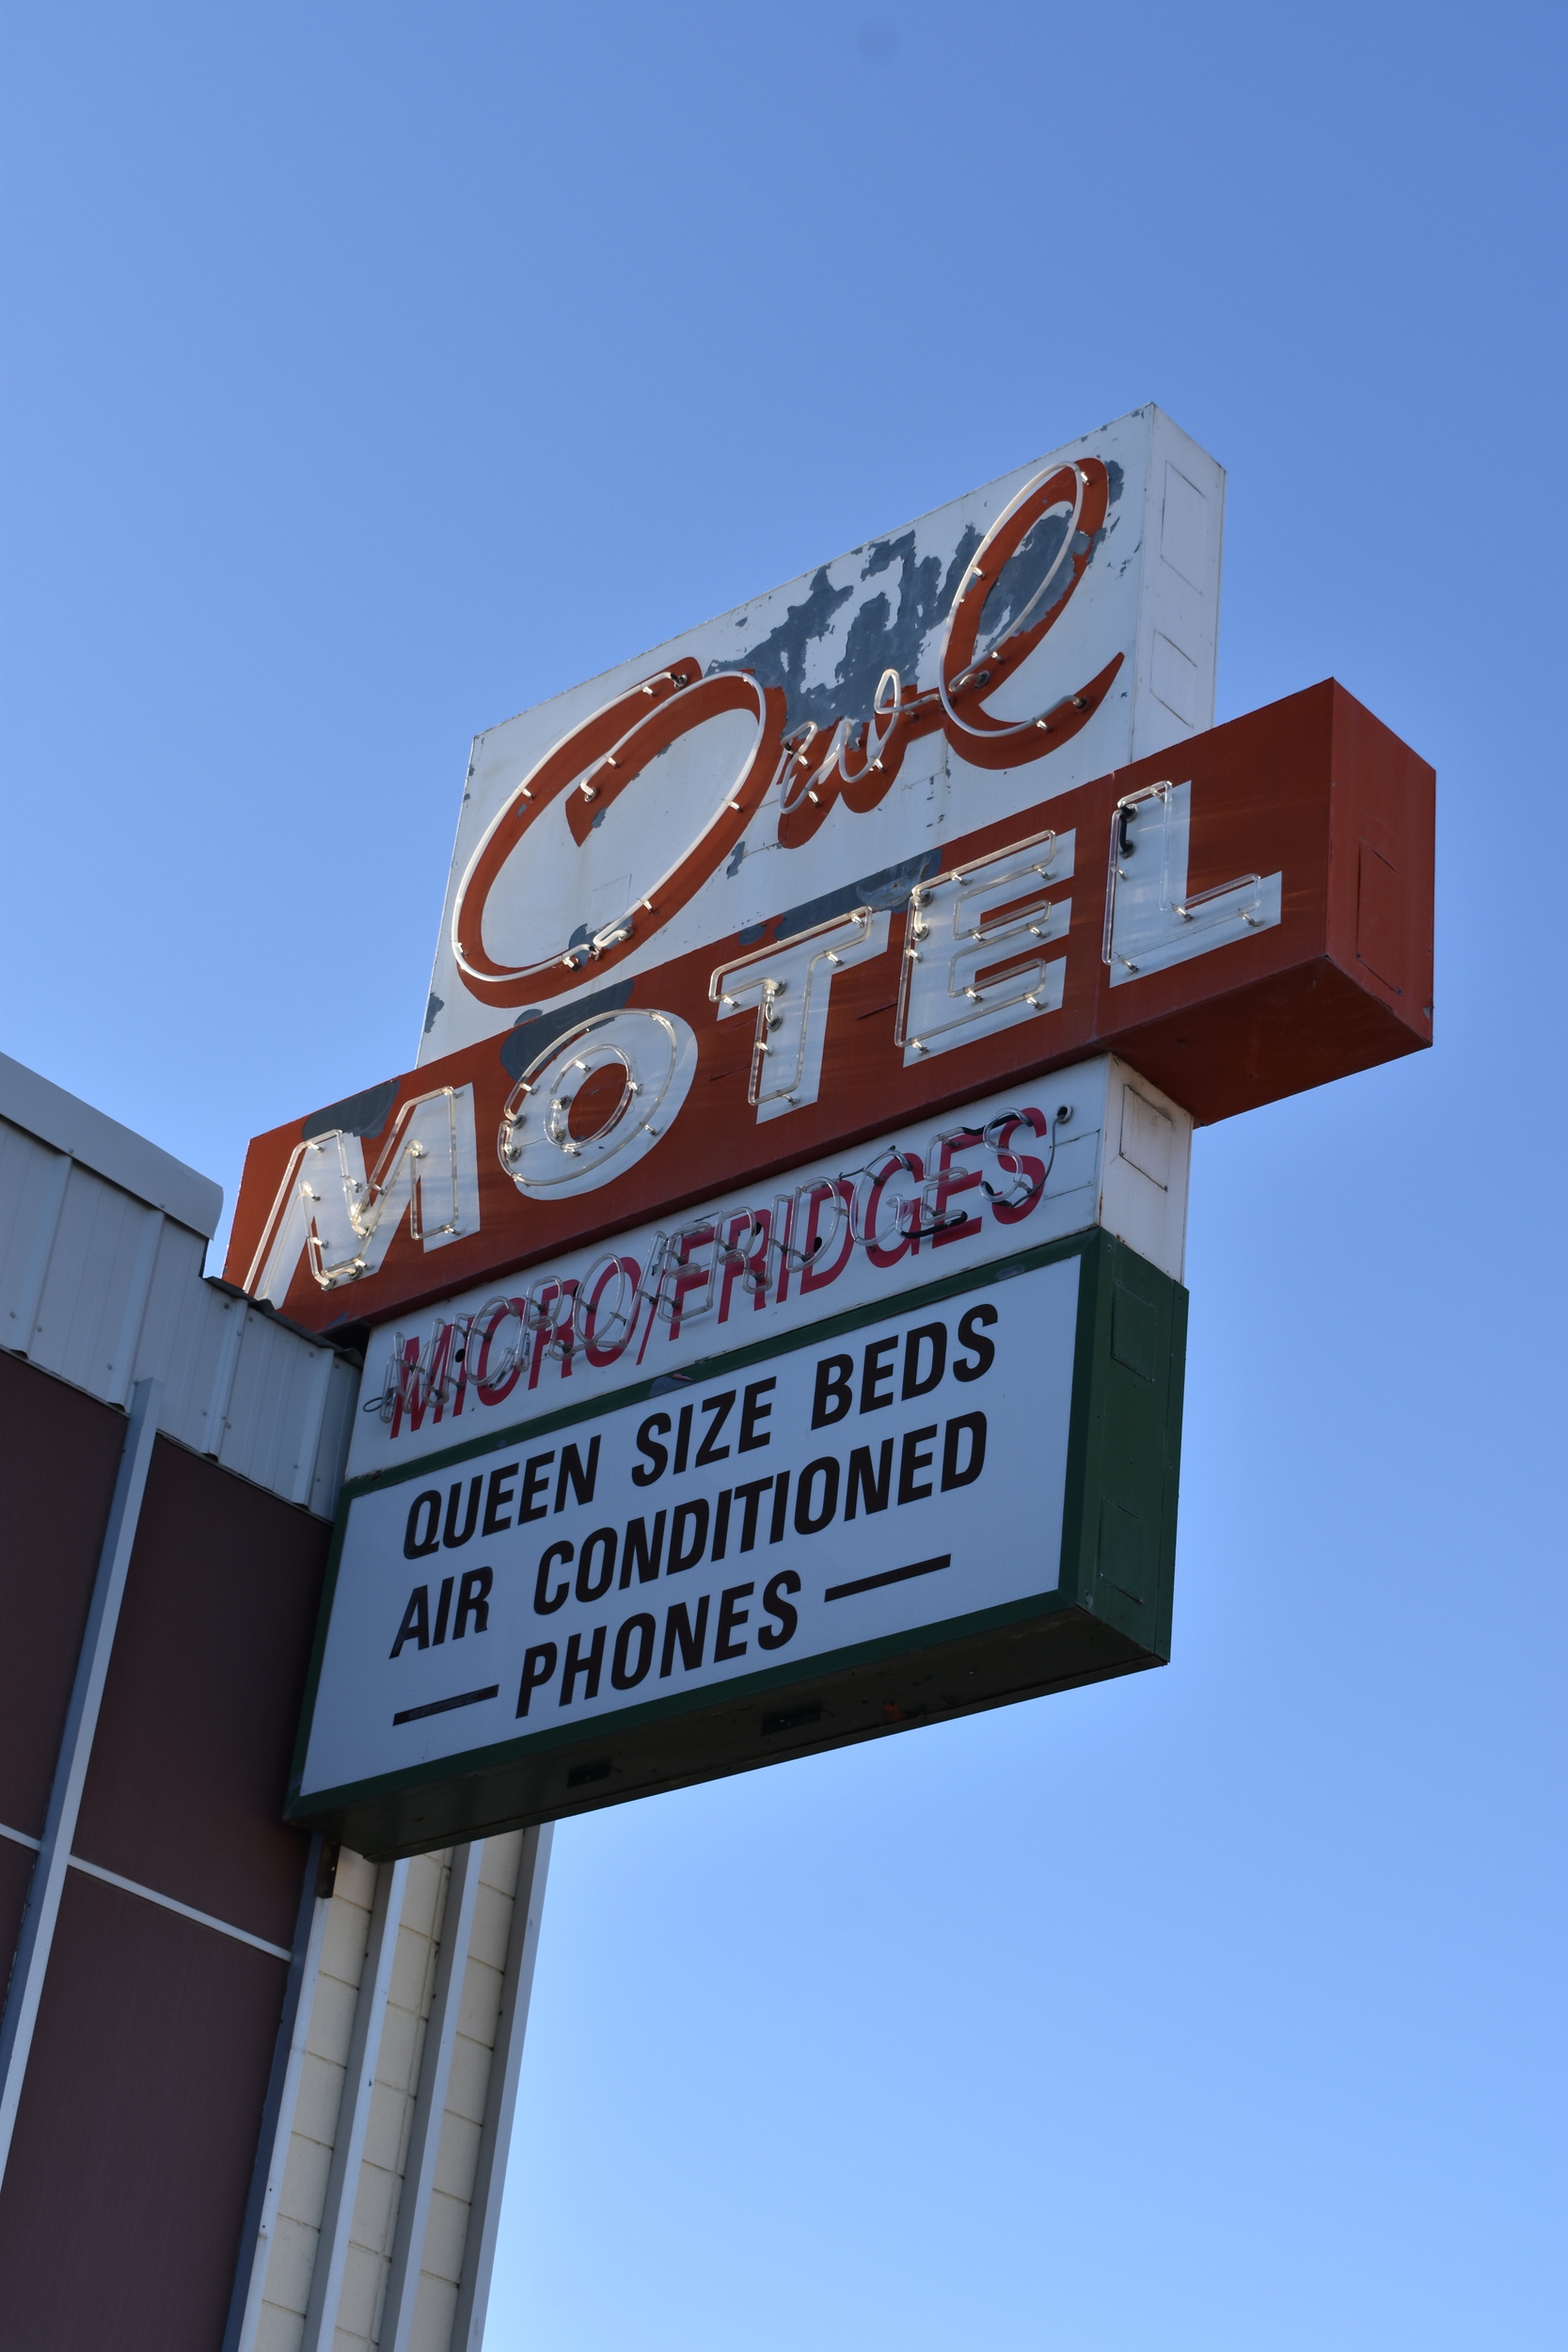 Owl Motel roof and wall mounted signs, Battle Mountain, Nevada